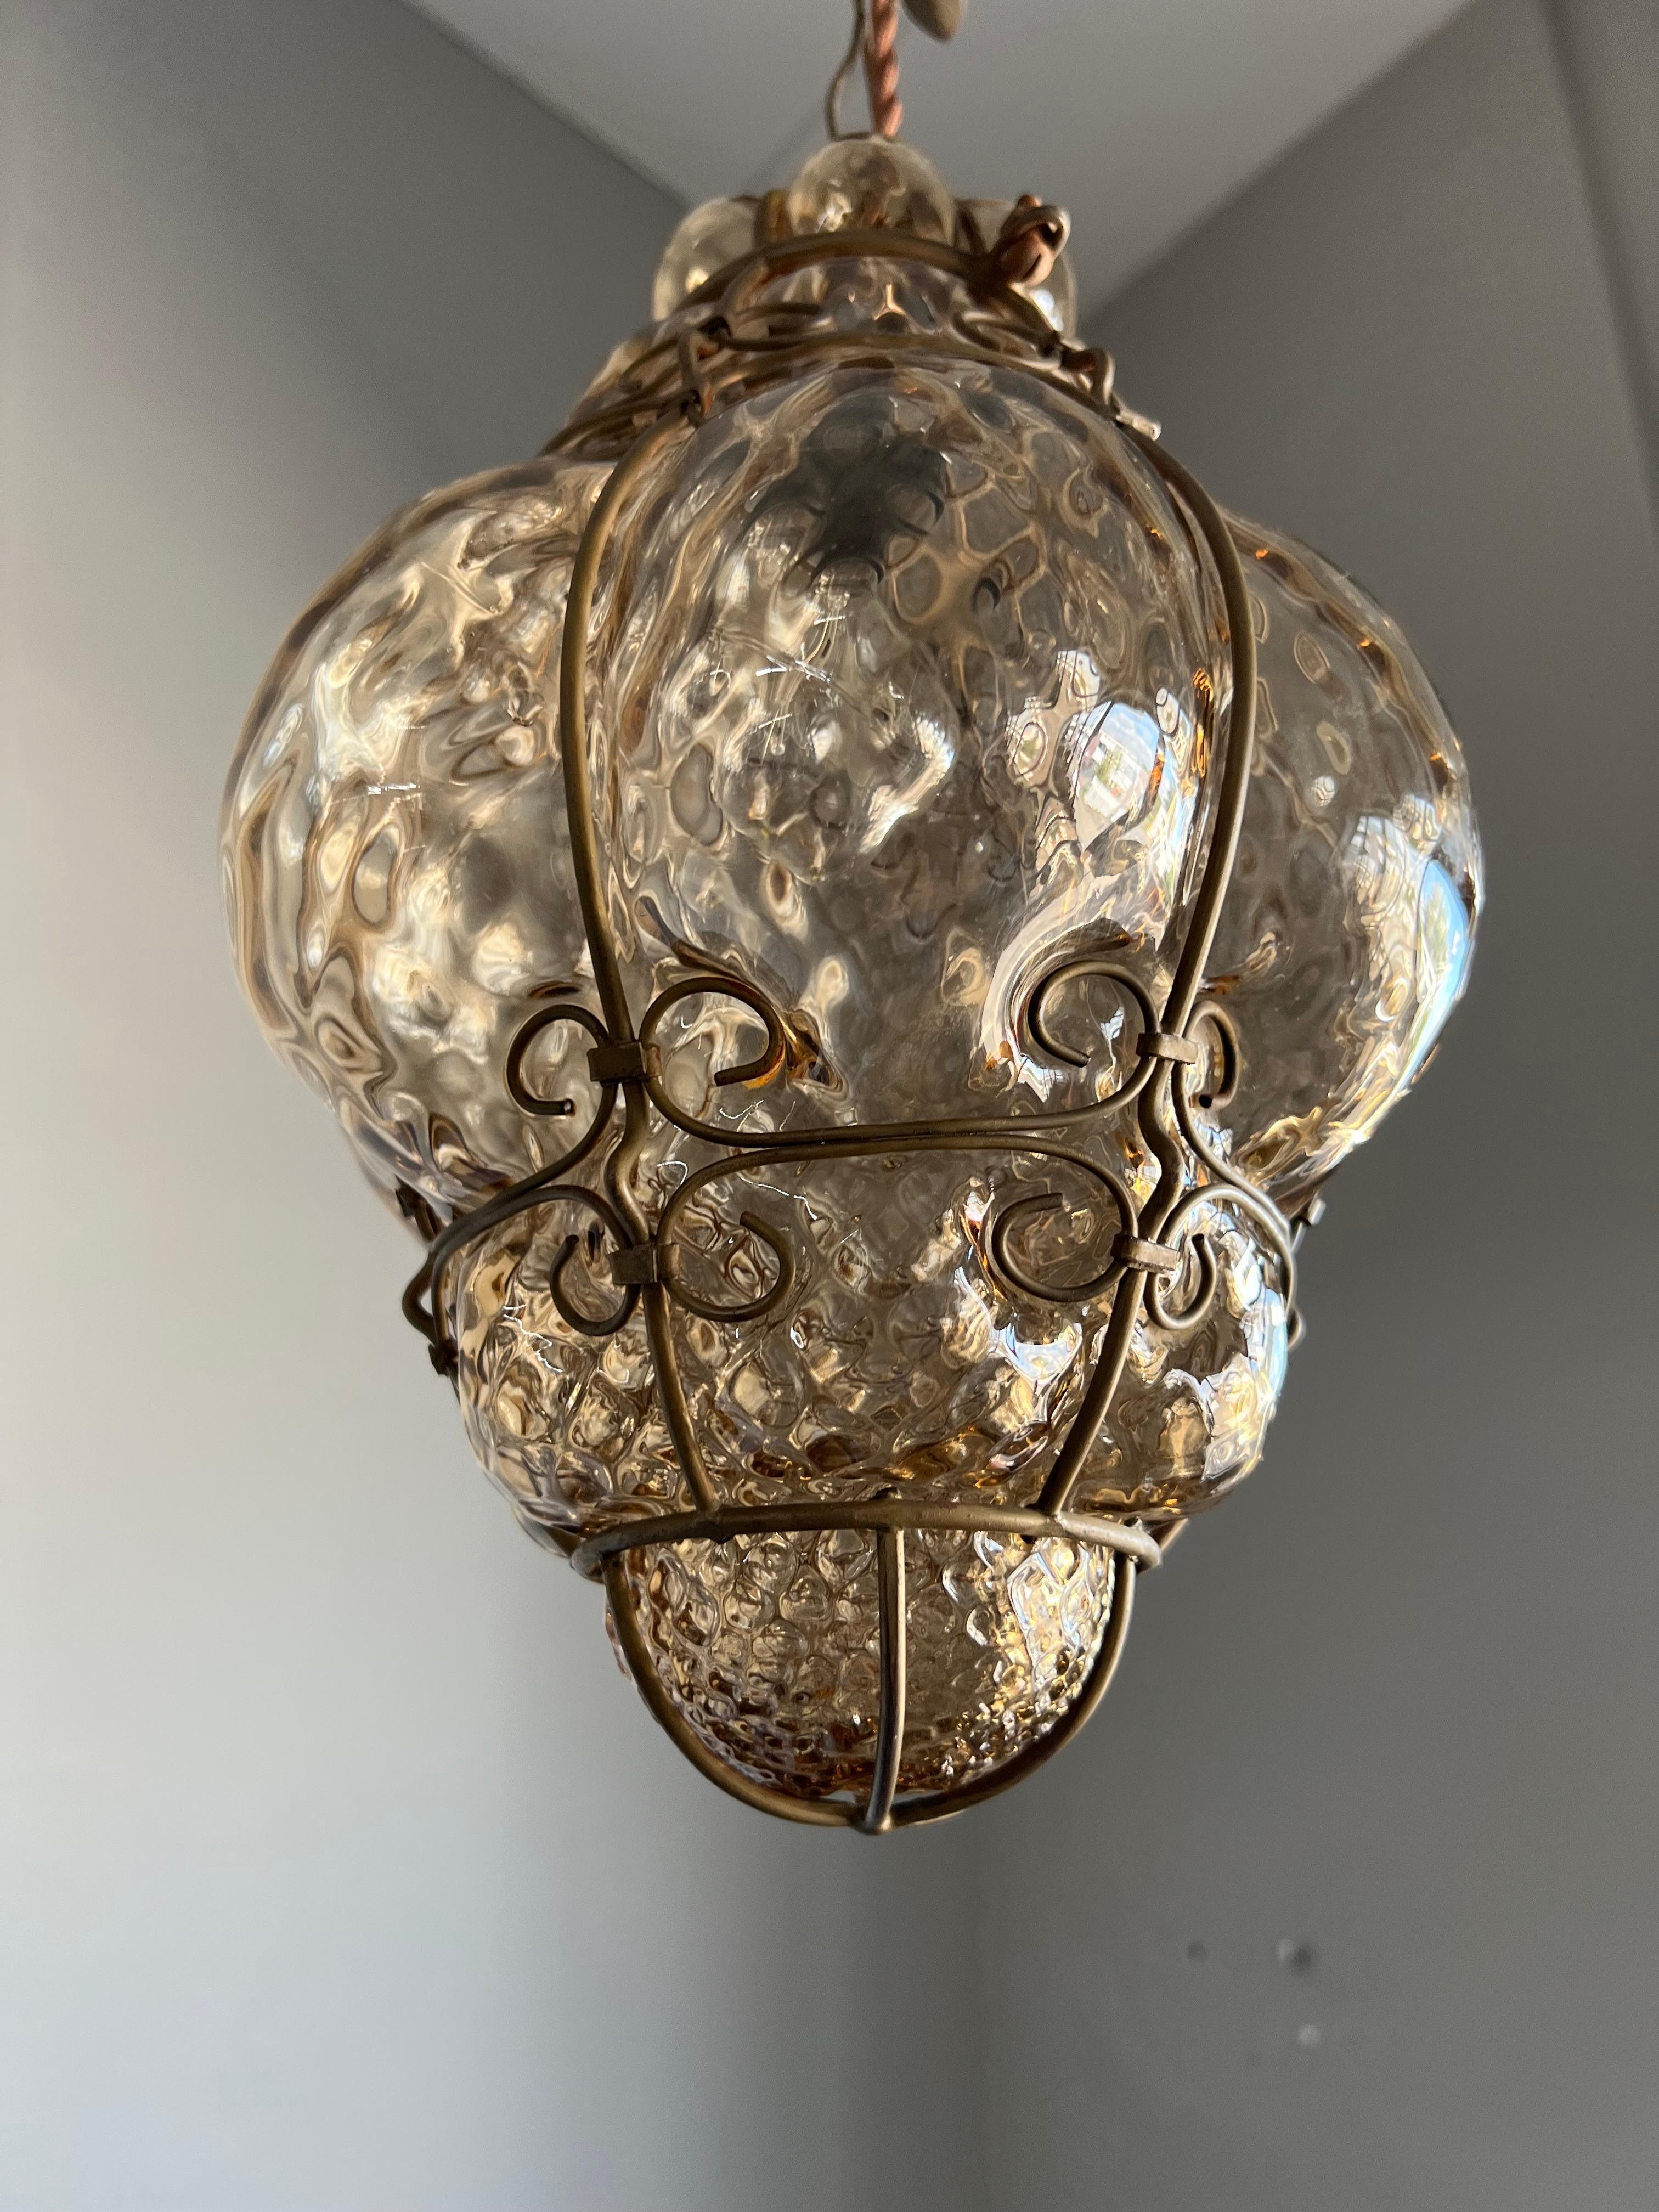 Good size and great condition light fixture. 

This Venetian pendant is in excellent condition. The thick shade of this smoked glass pendant is perfectly and symmetrically mouth blown into the hand crafted metal frame and the result is an absolute